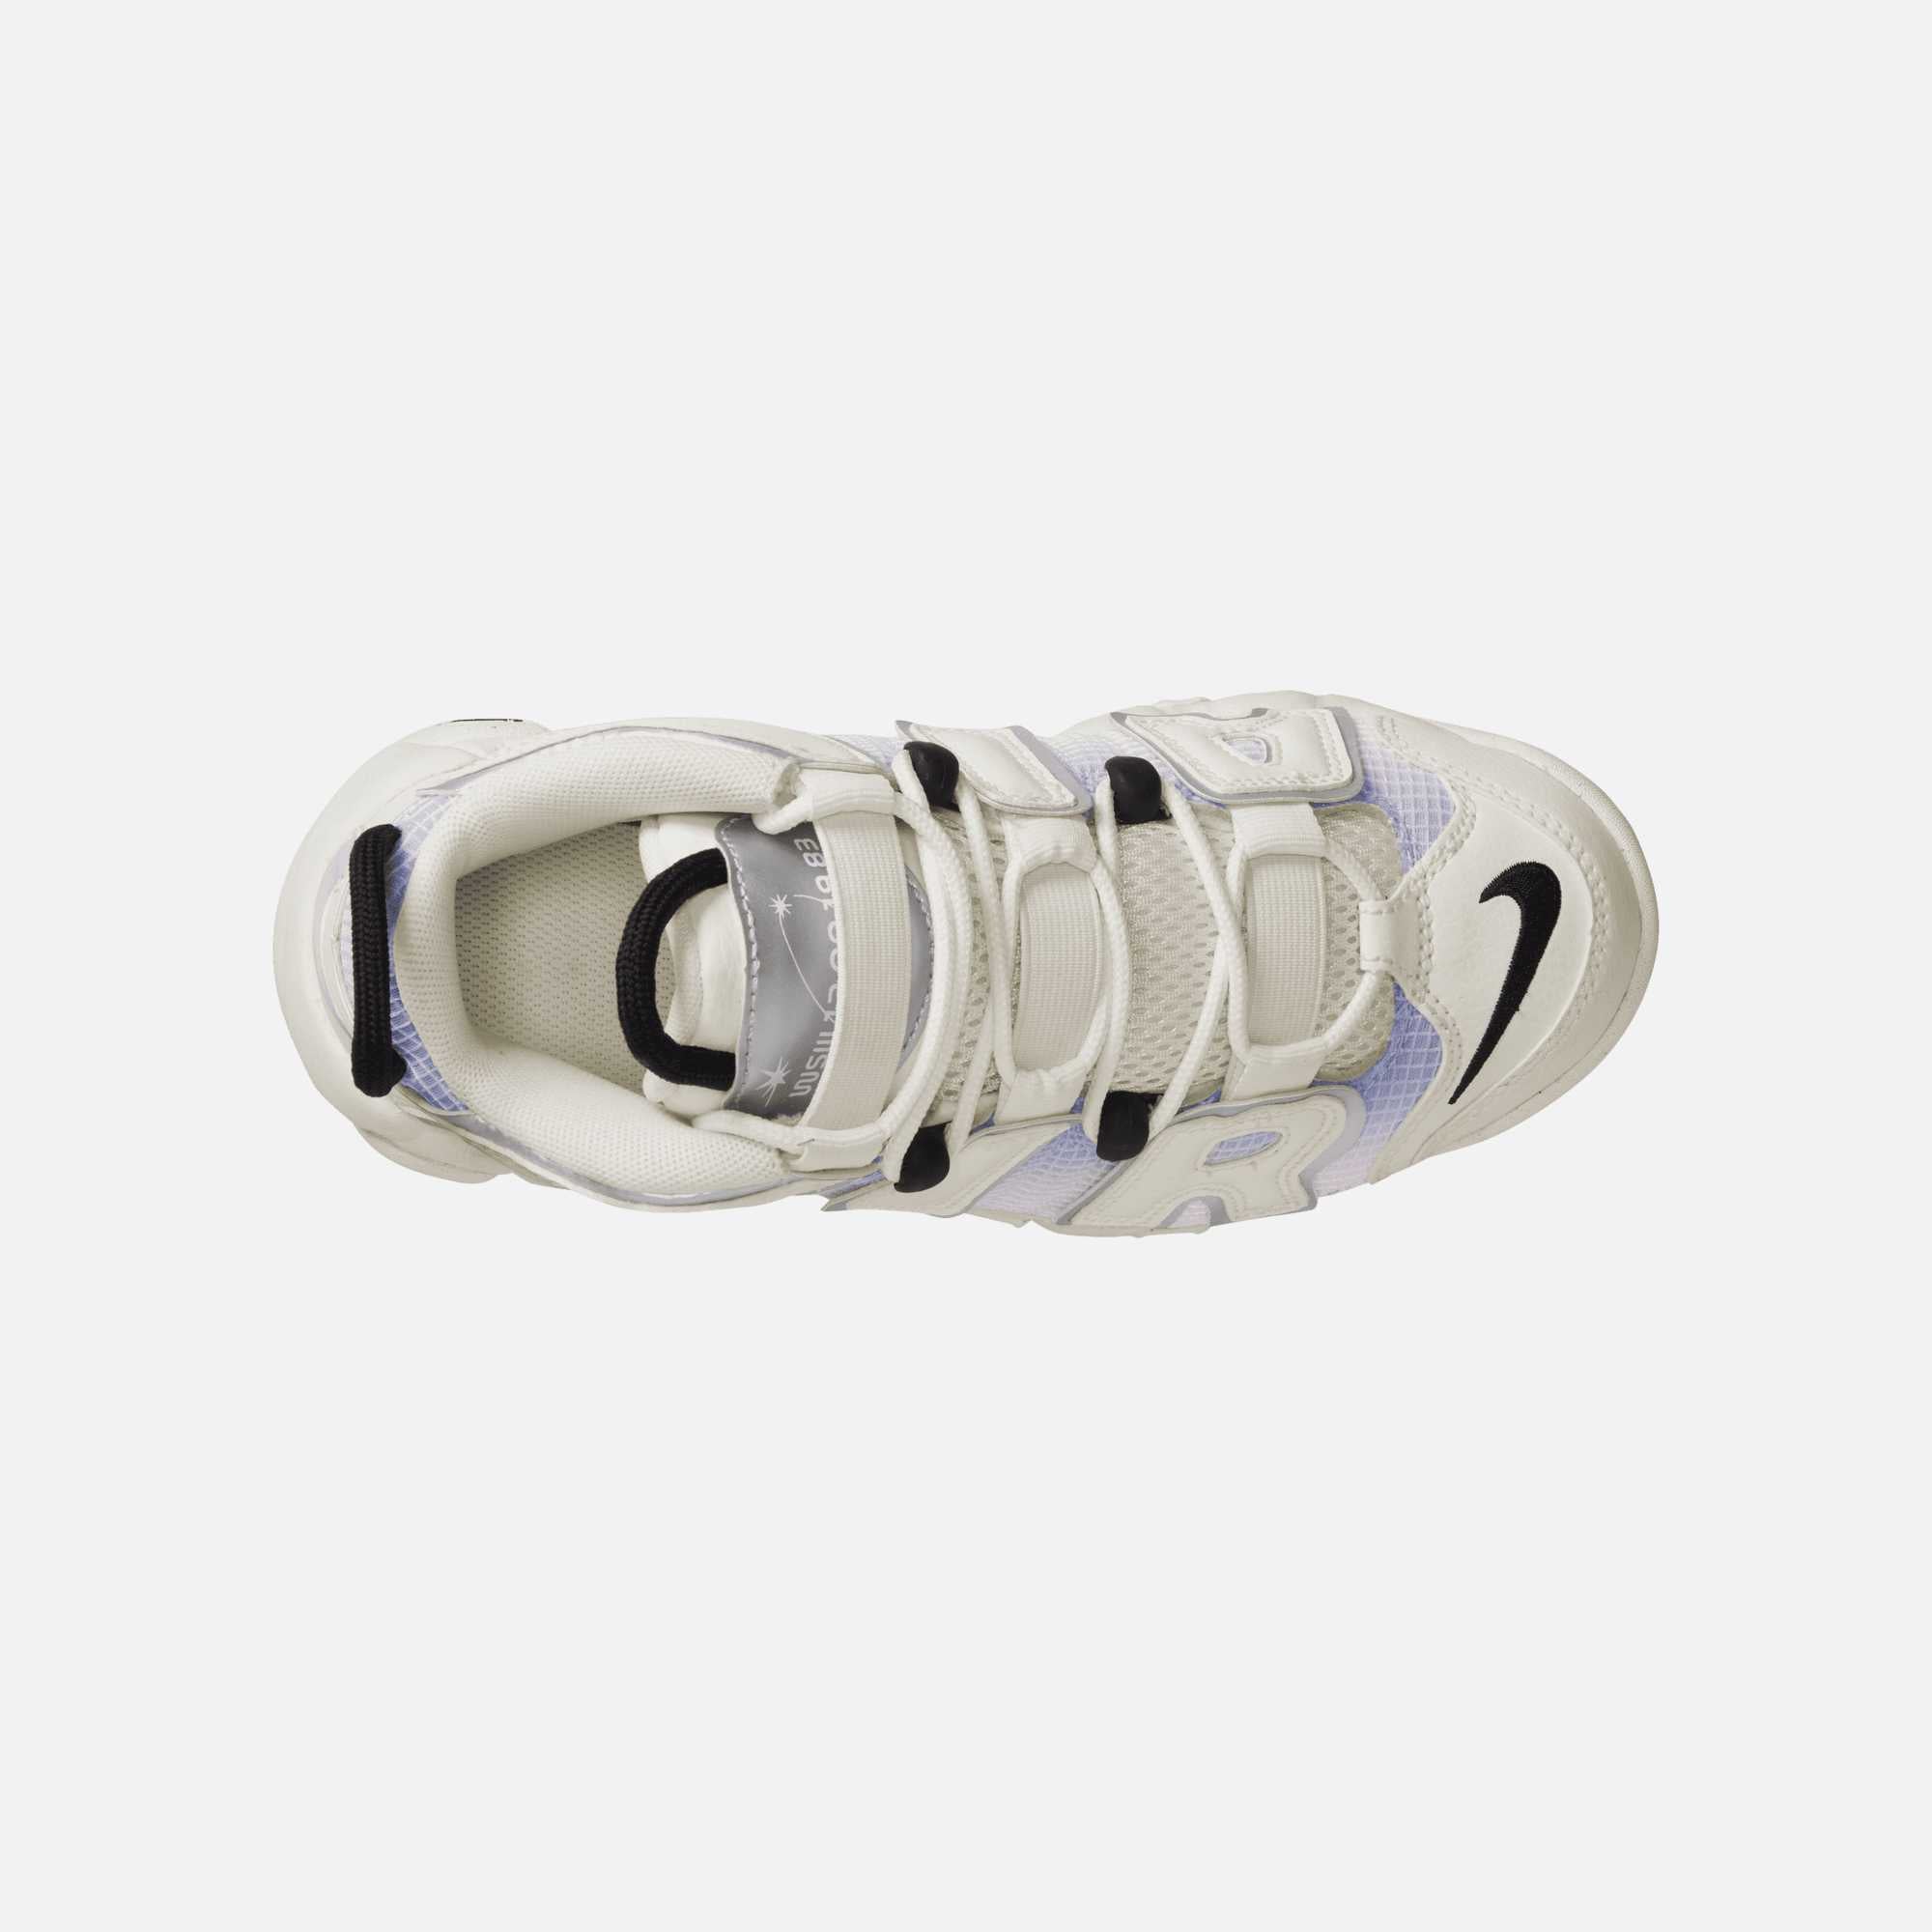 Nike Air More Uptempo (GS) Gradient Nike